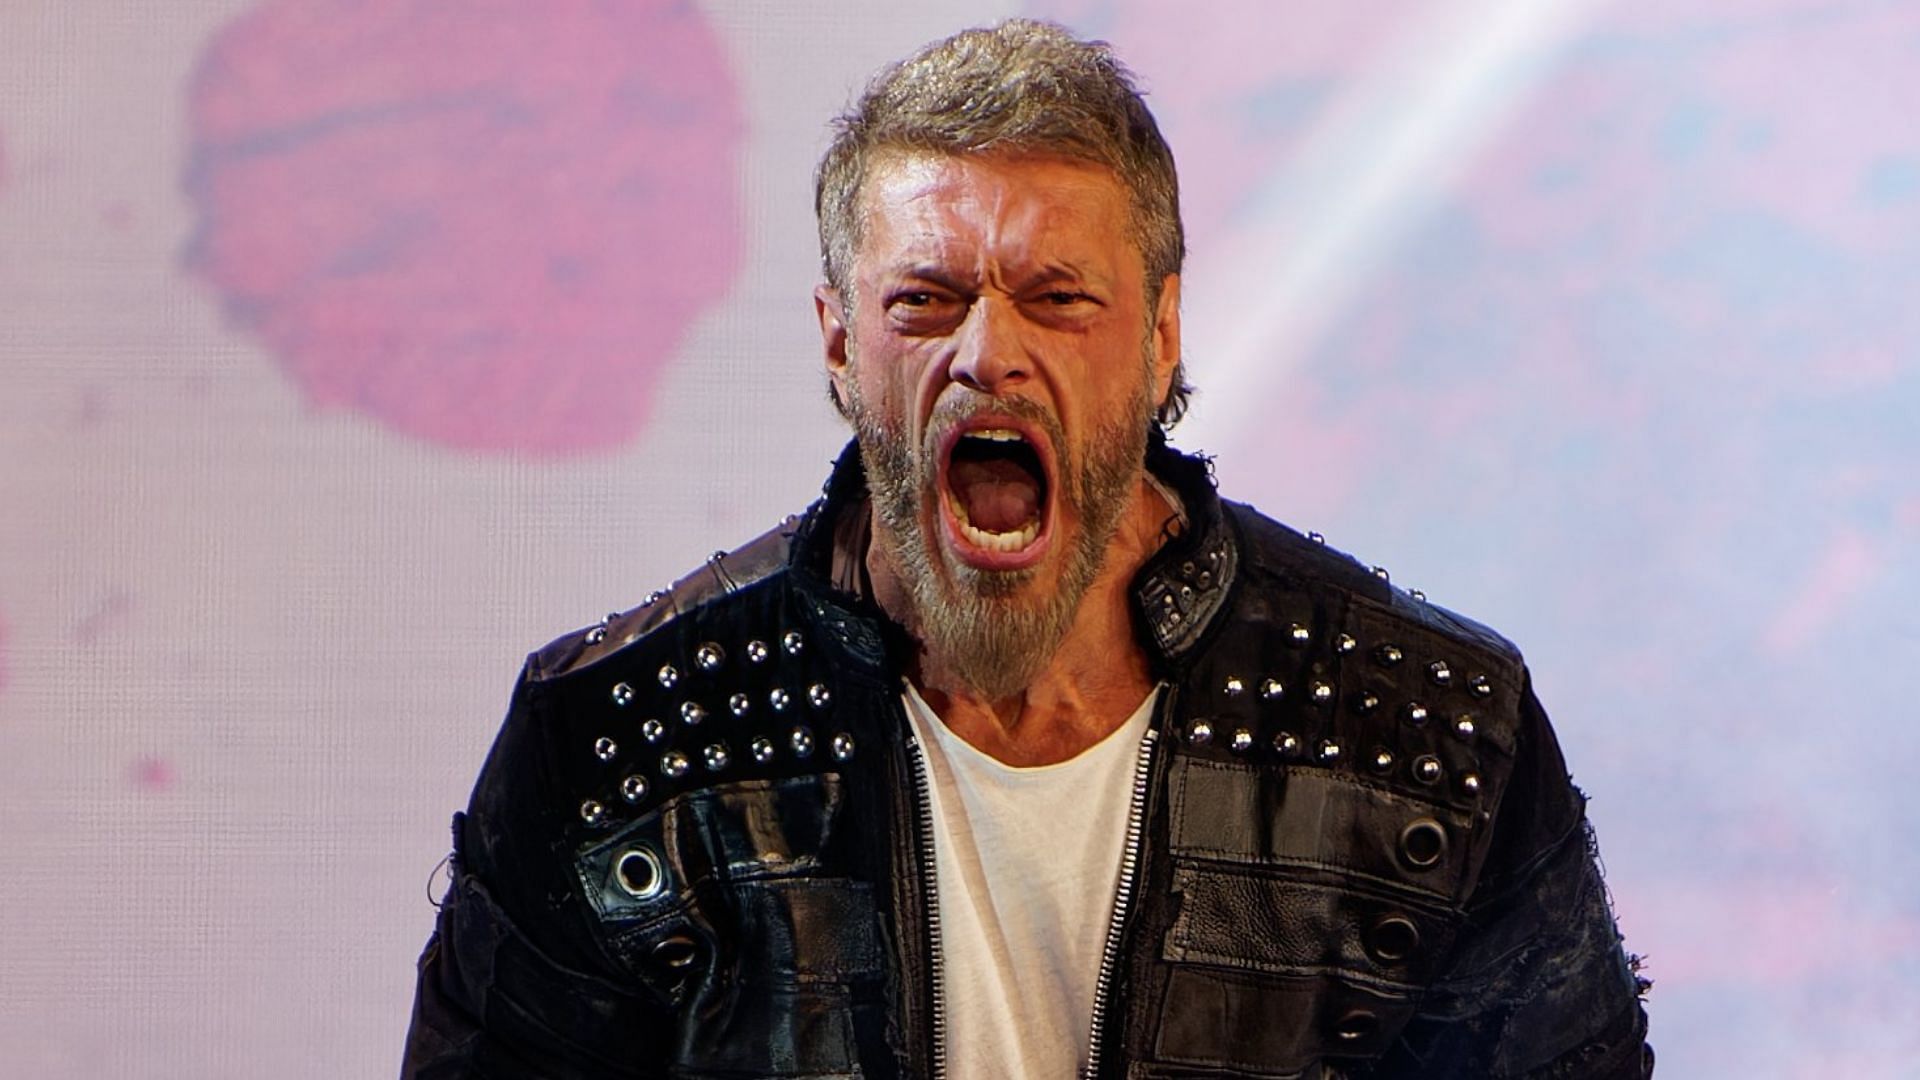 Current AEW champion reveals what plans they have for Adam Copeland (Edge)